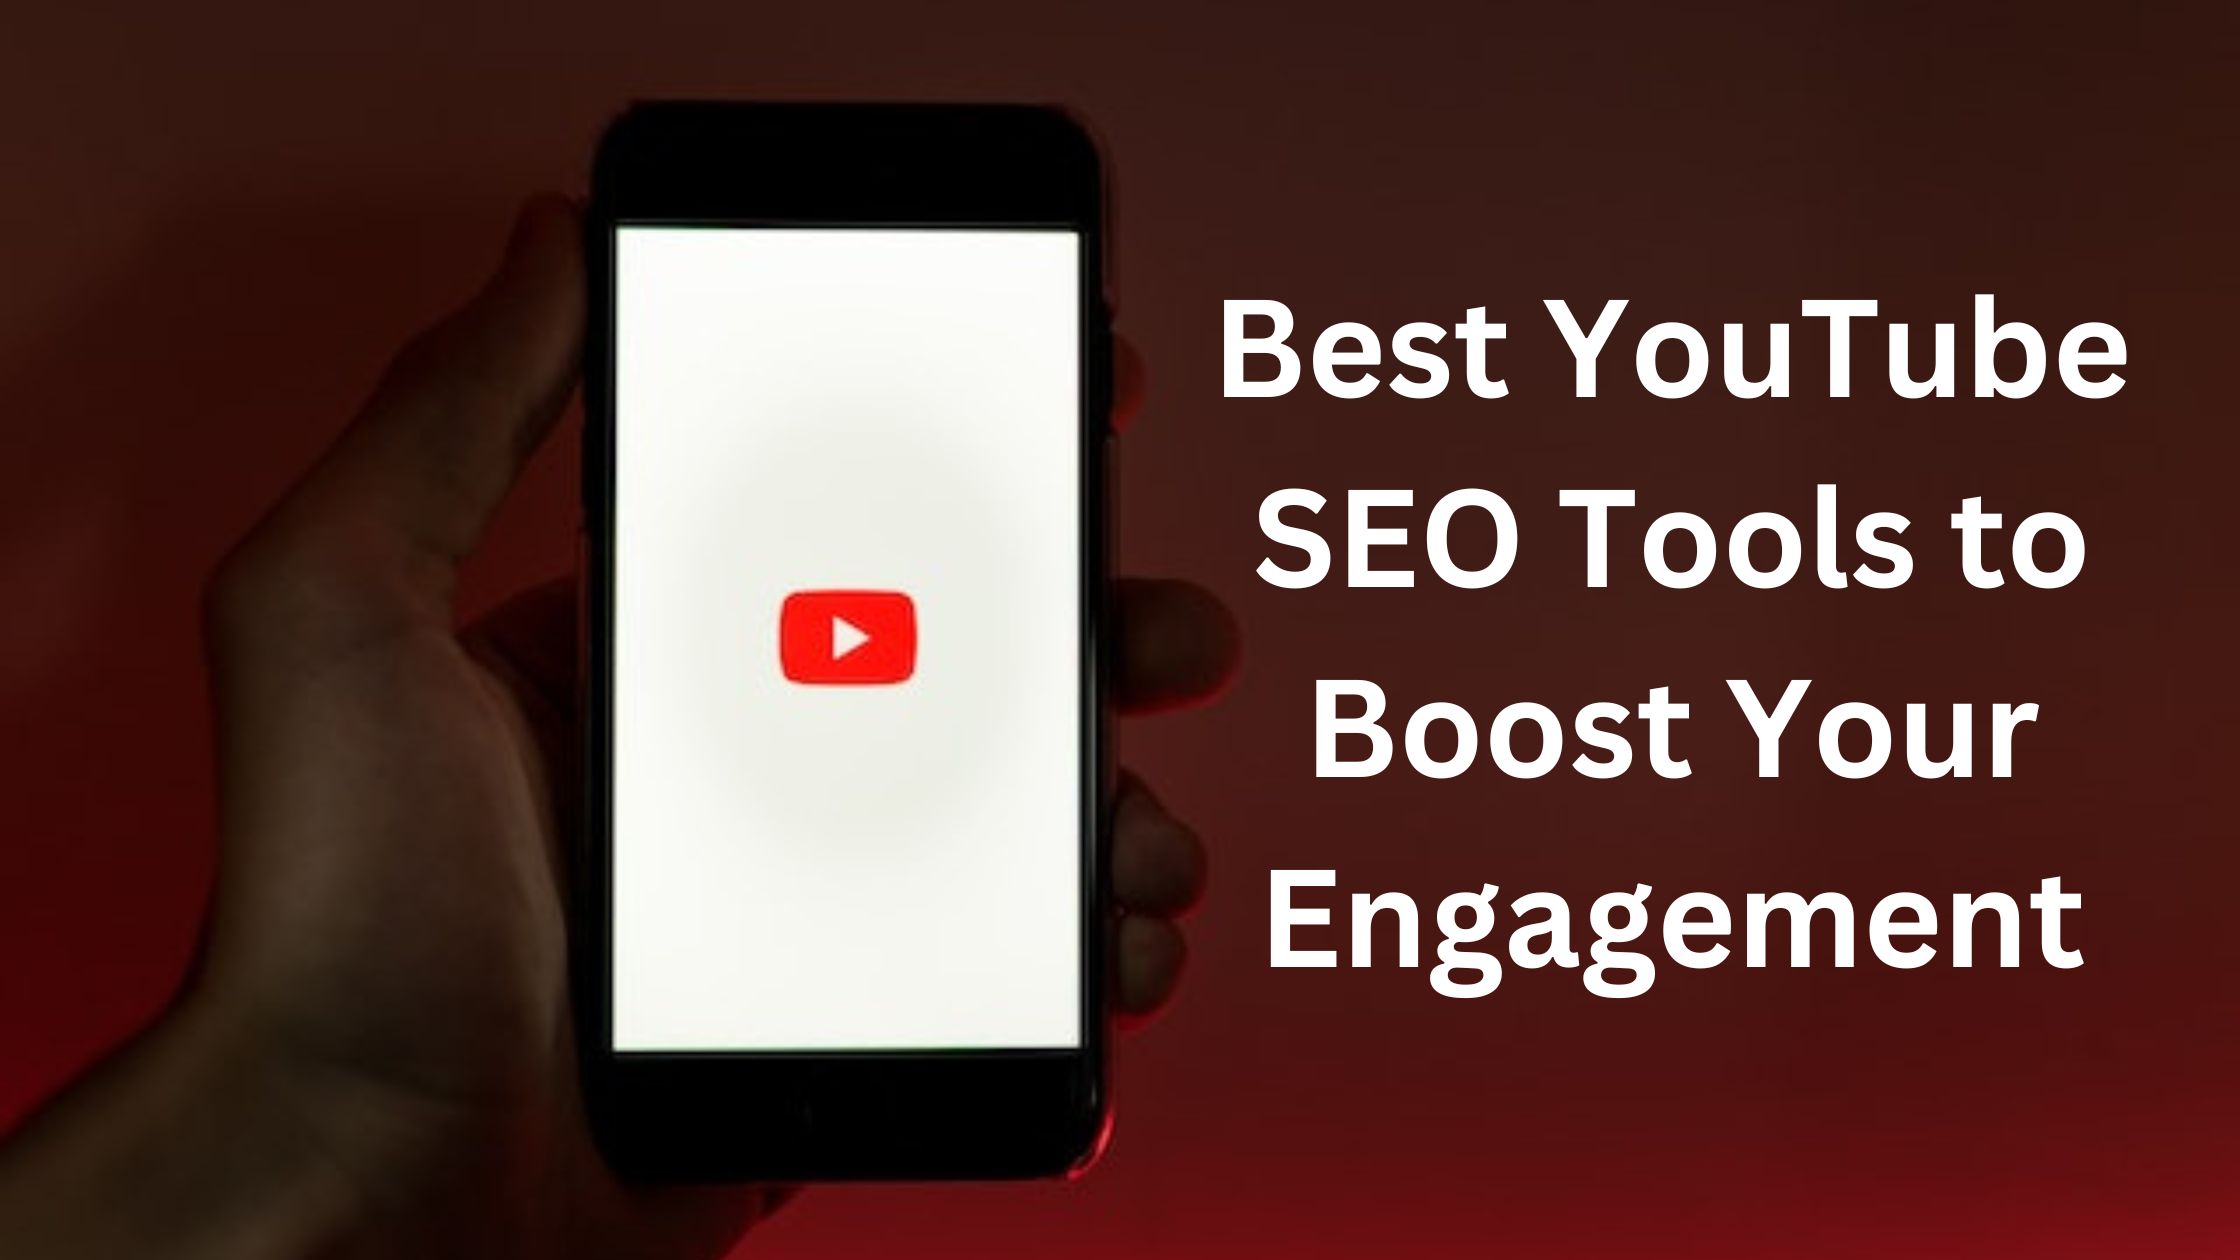 You are currently viewing 7 Best SEO Tools for YouTube to Boost Your Ranking and Views